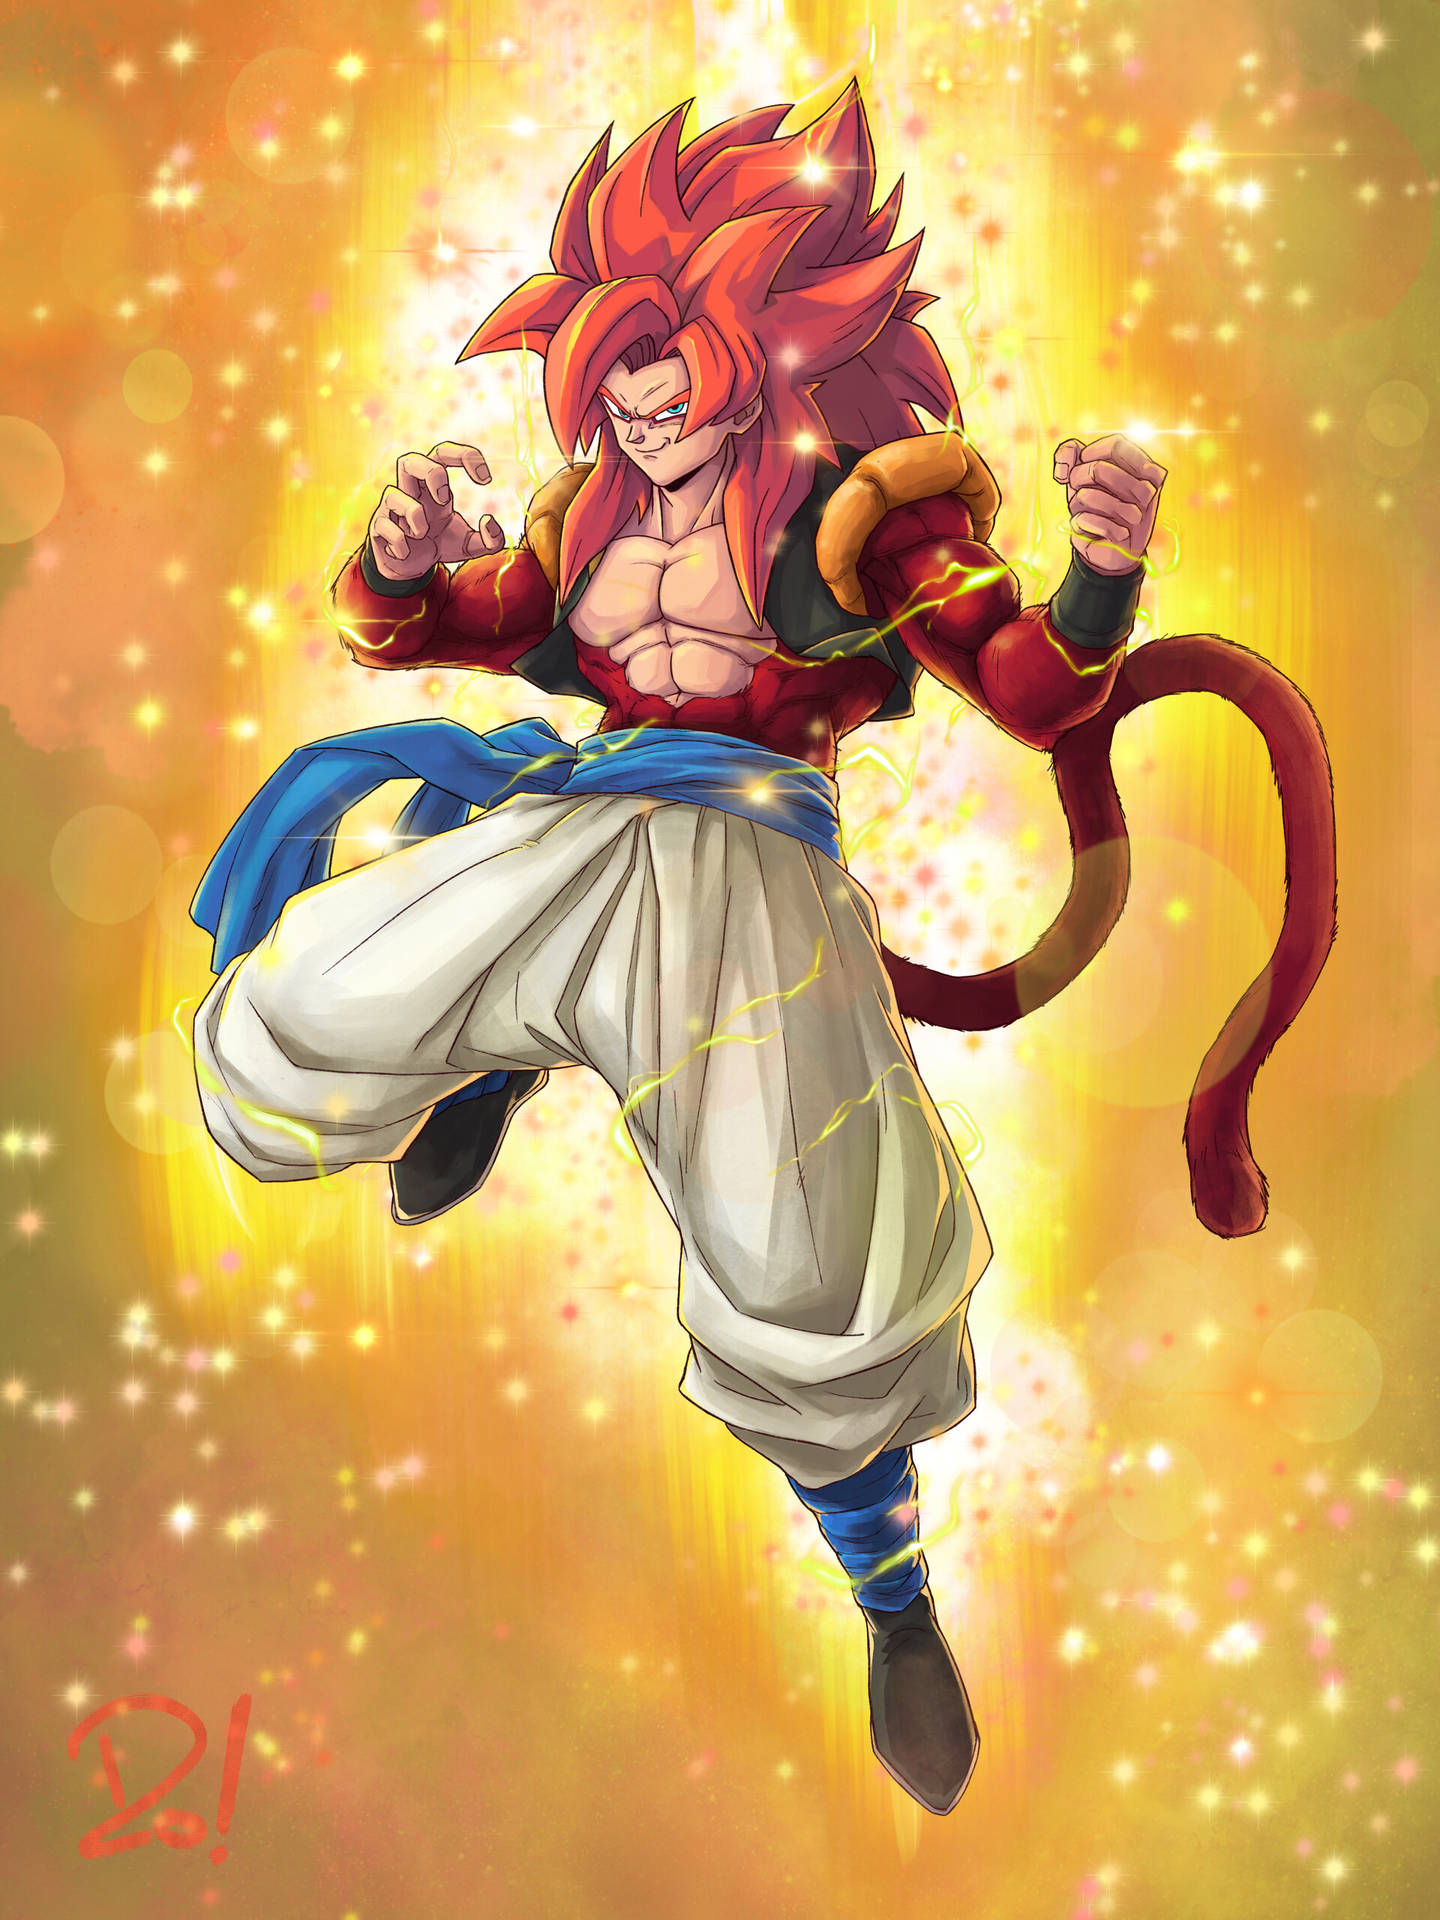 The Unstoppable Force - Gogeta In Action Wallpaper